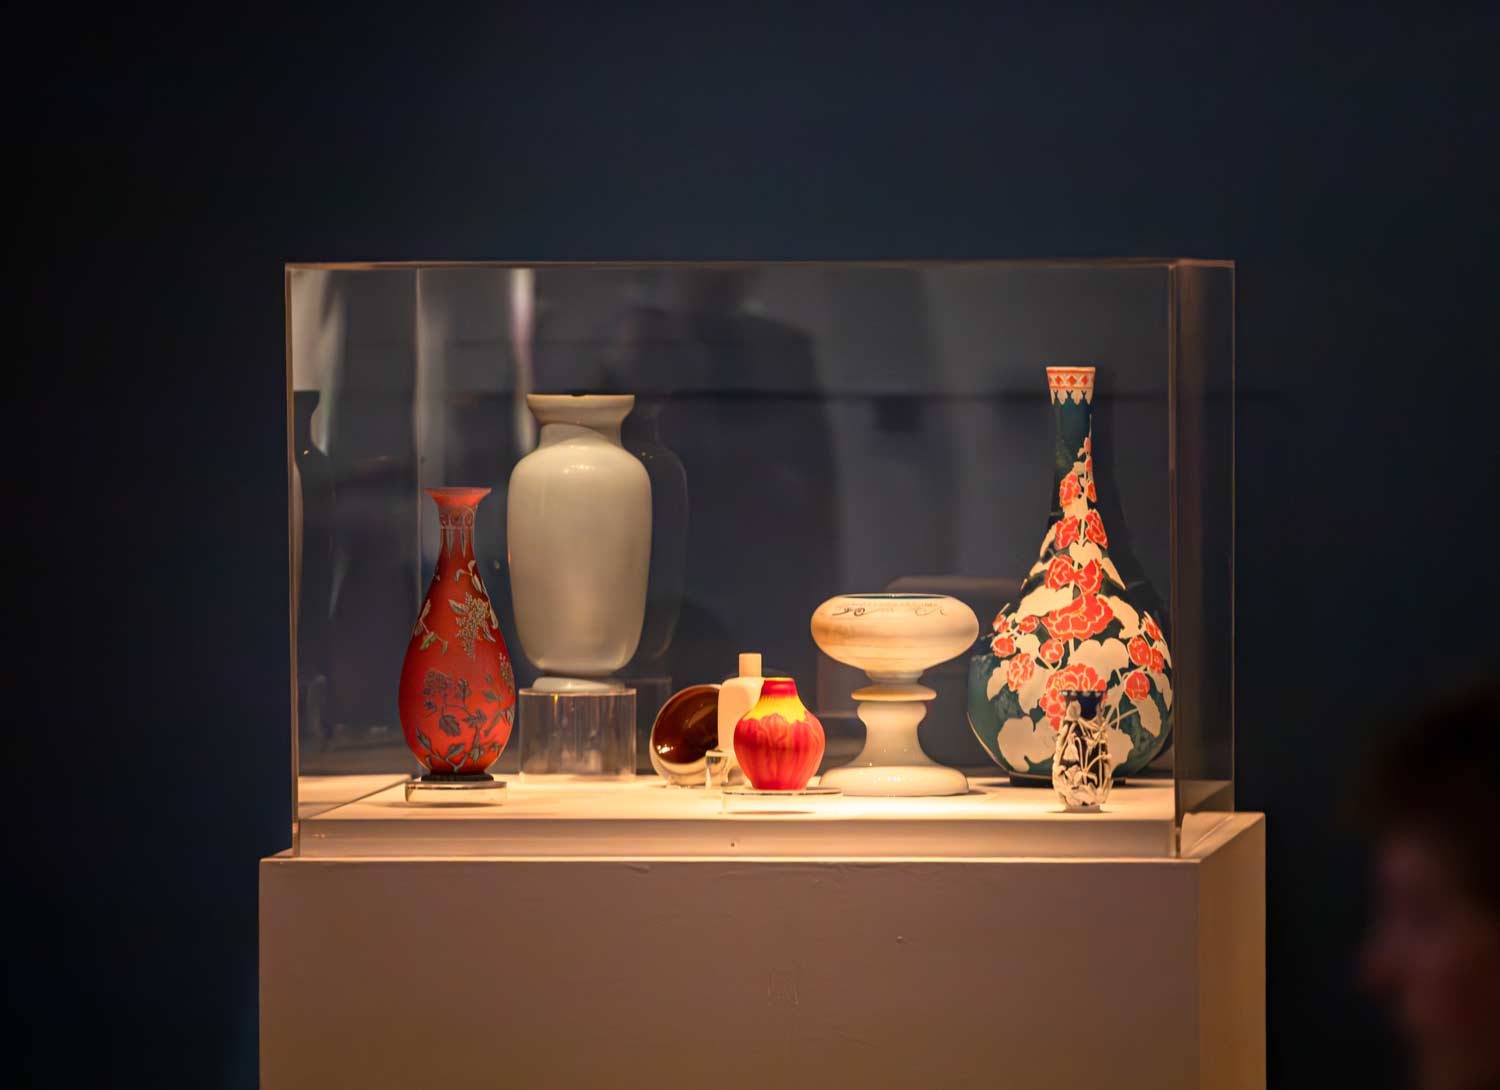 Colorful vases of various shapes and sizes in a glass display.